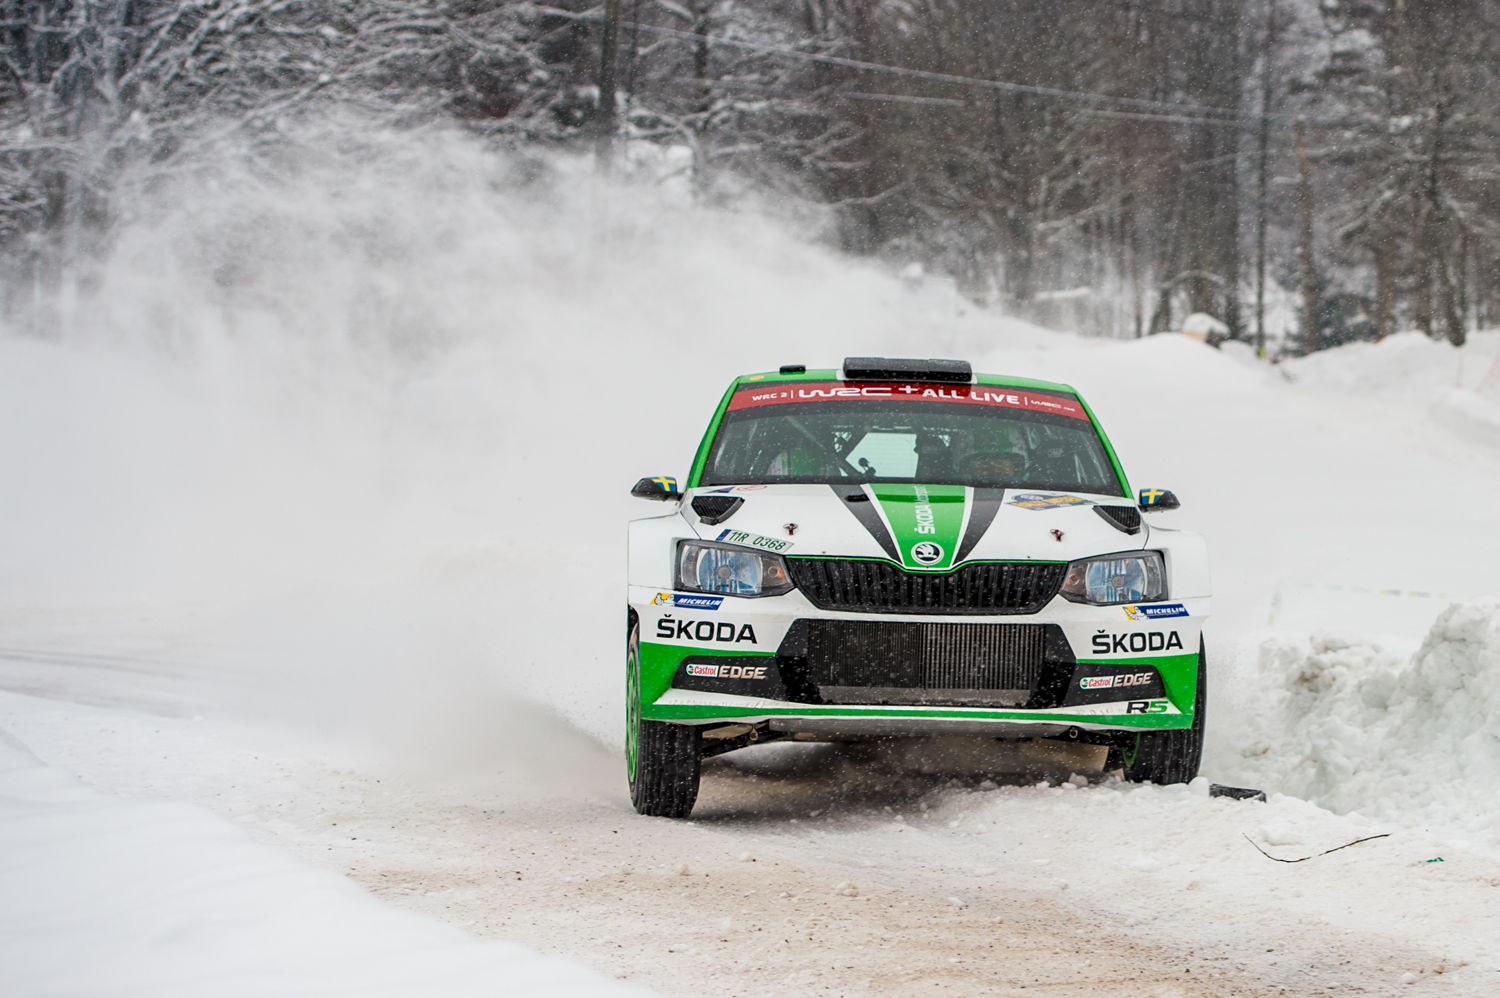 After day two, Pontus Tidemand/Jonas Andersson (SWE/SWE), driving a ŠKODA FABIA R5, are second in the WRC 2 category, just four seconds behind the leader